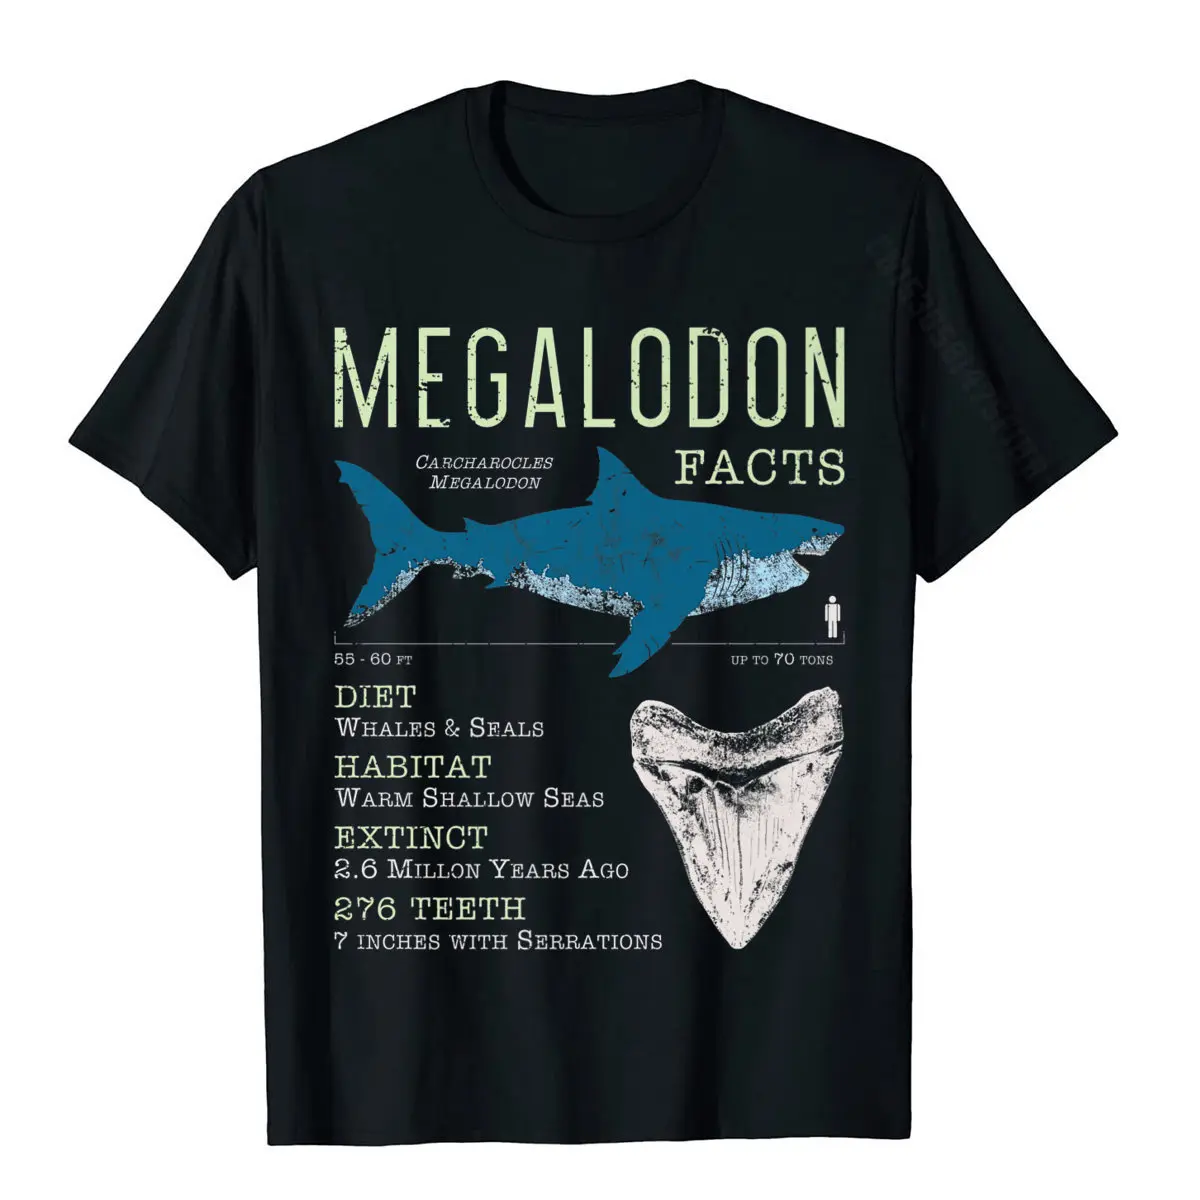 Megalodon T-Shirt | Meg Facts Funny Shark Lover T Shirt Gift Top T-Shirts For Men Summer Tees Discount Cool Cotton